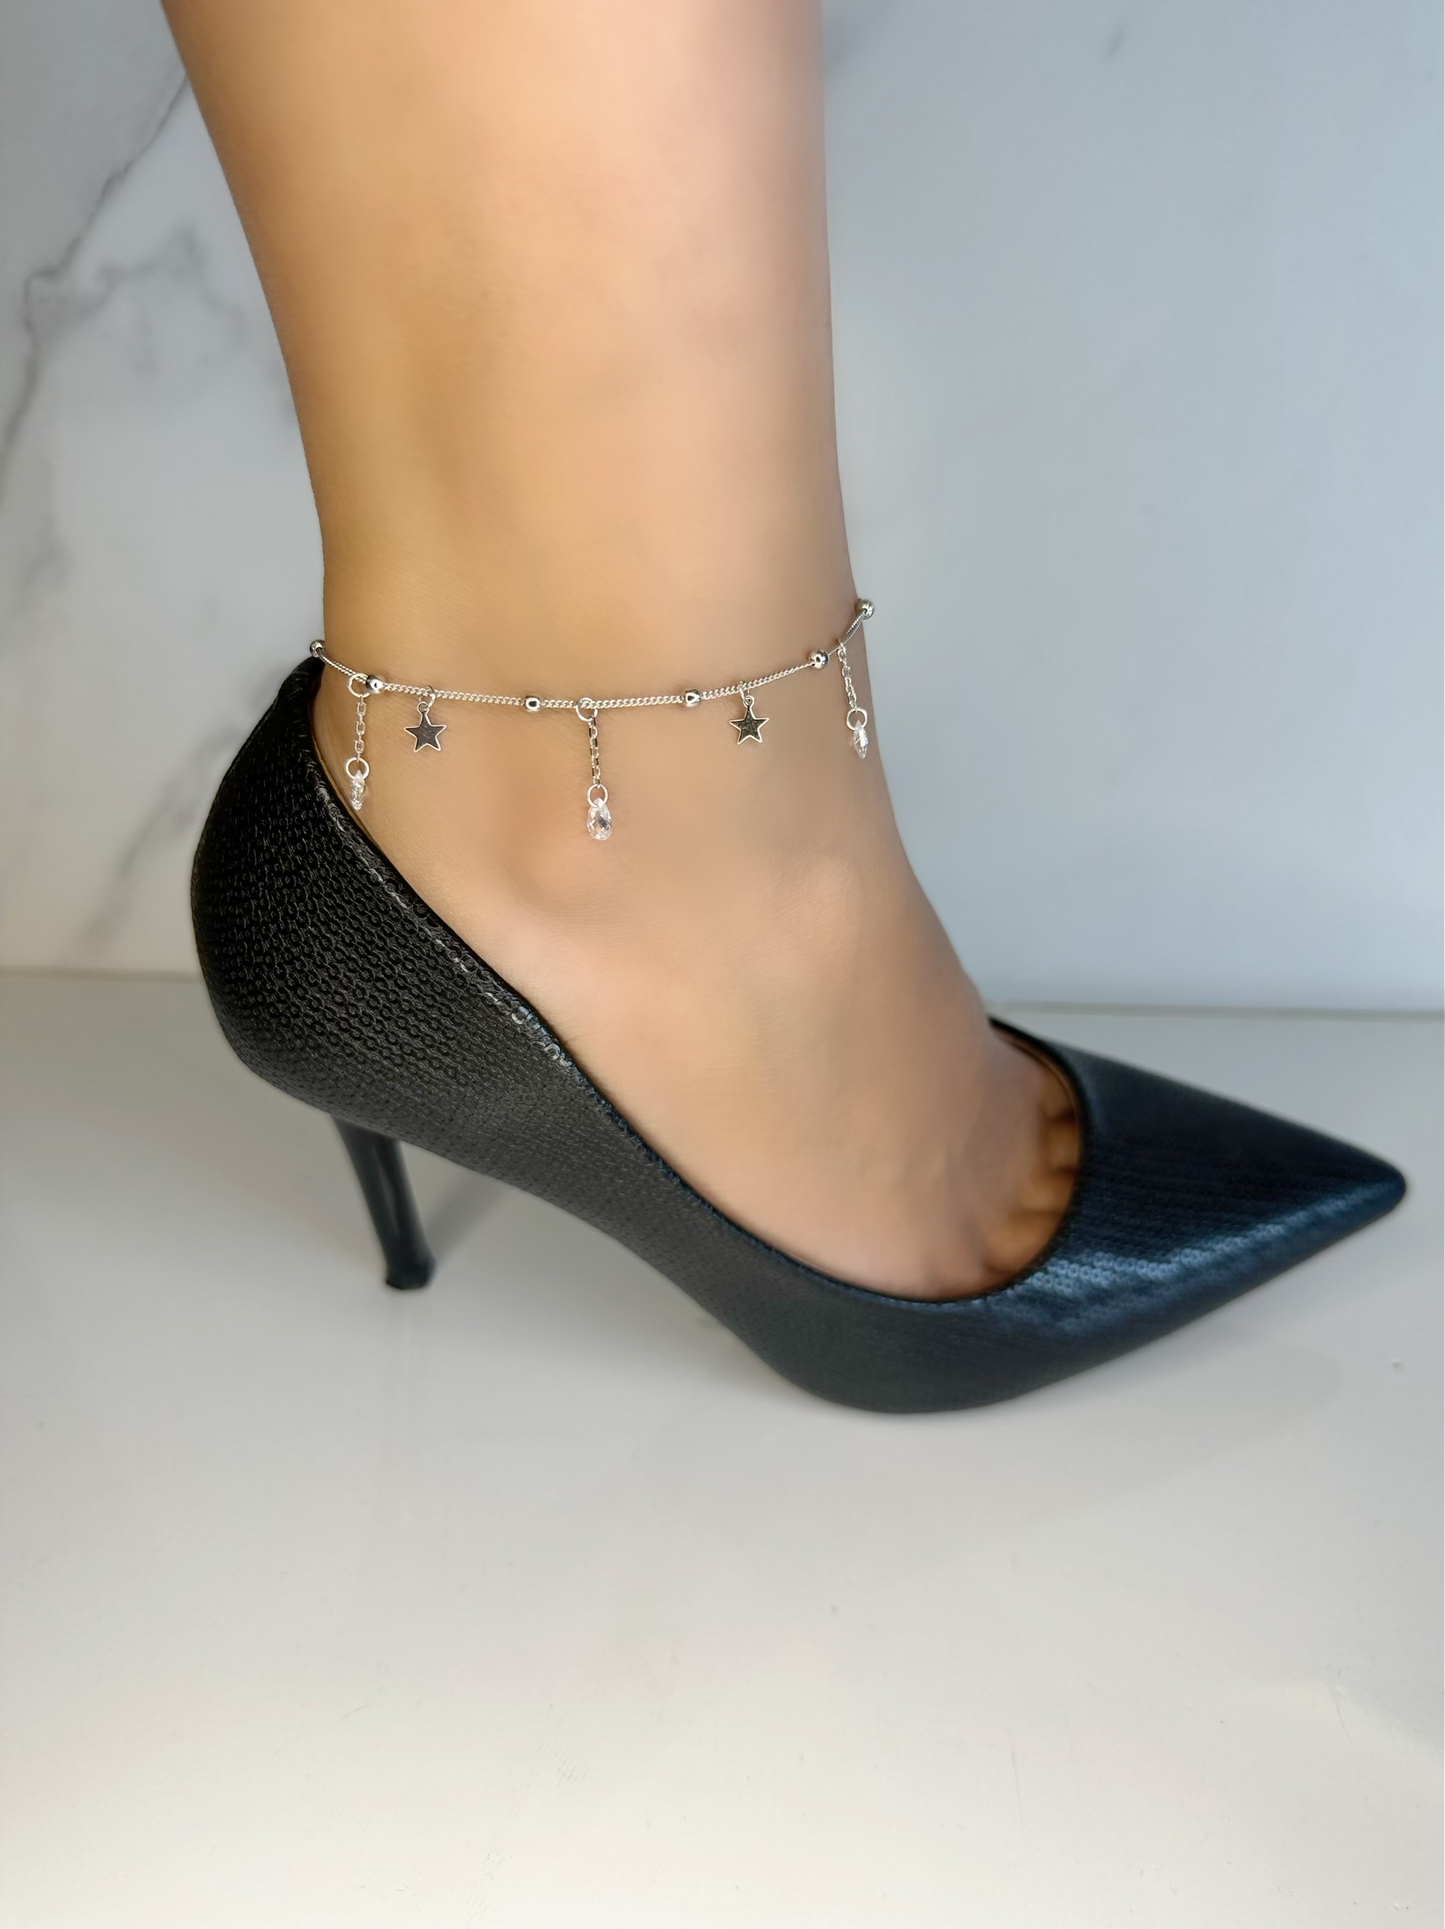 Anklet With Star and Tear Drop Zircon Stones